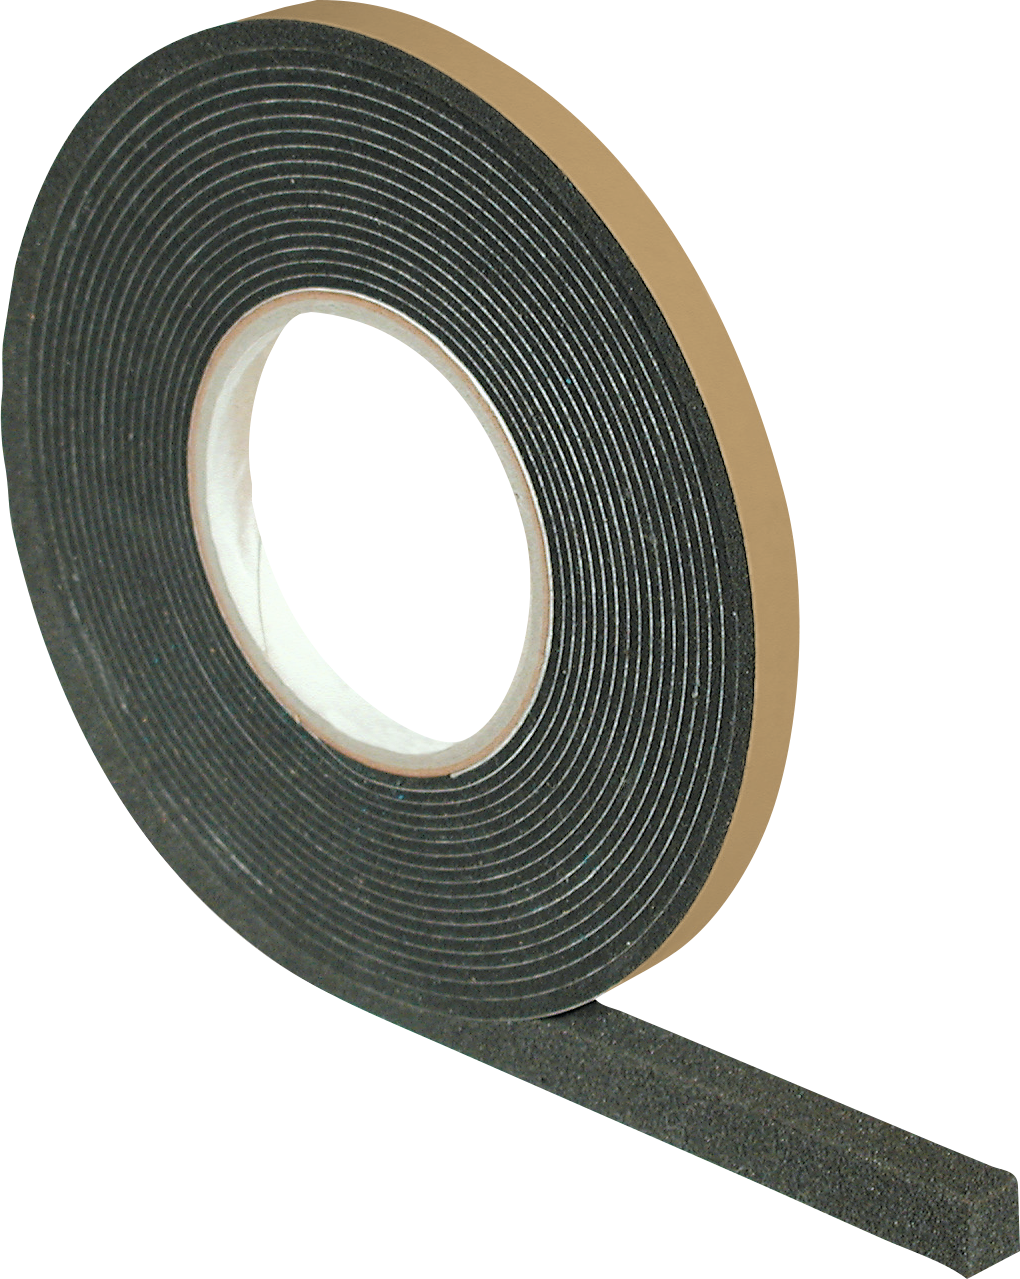 OTTO FUGENBAND BG1 20/2 A VE 62.5M 12.5M/ROLLE